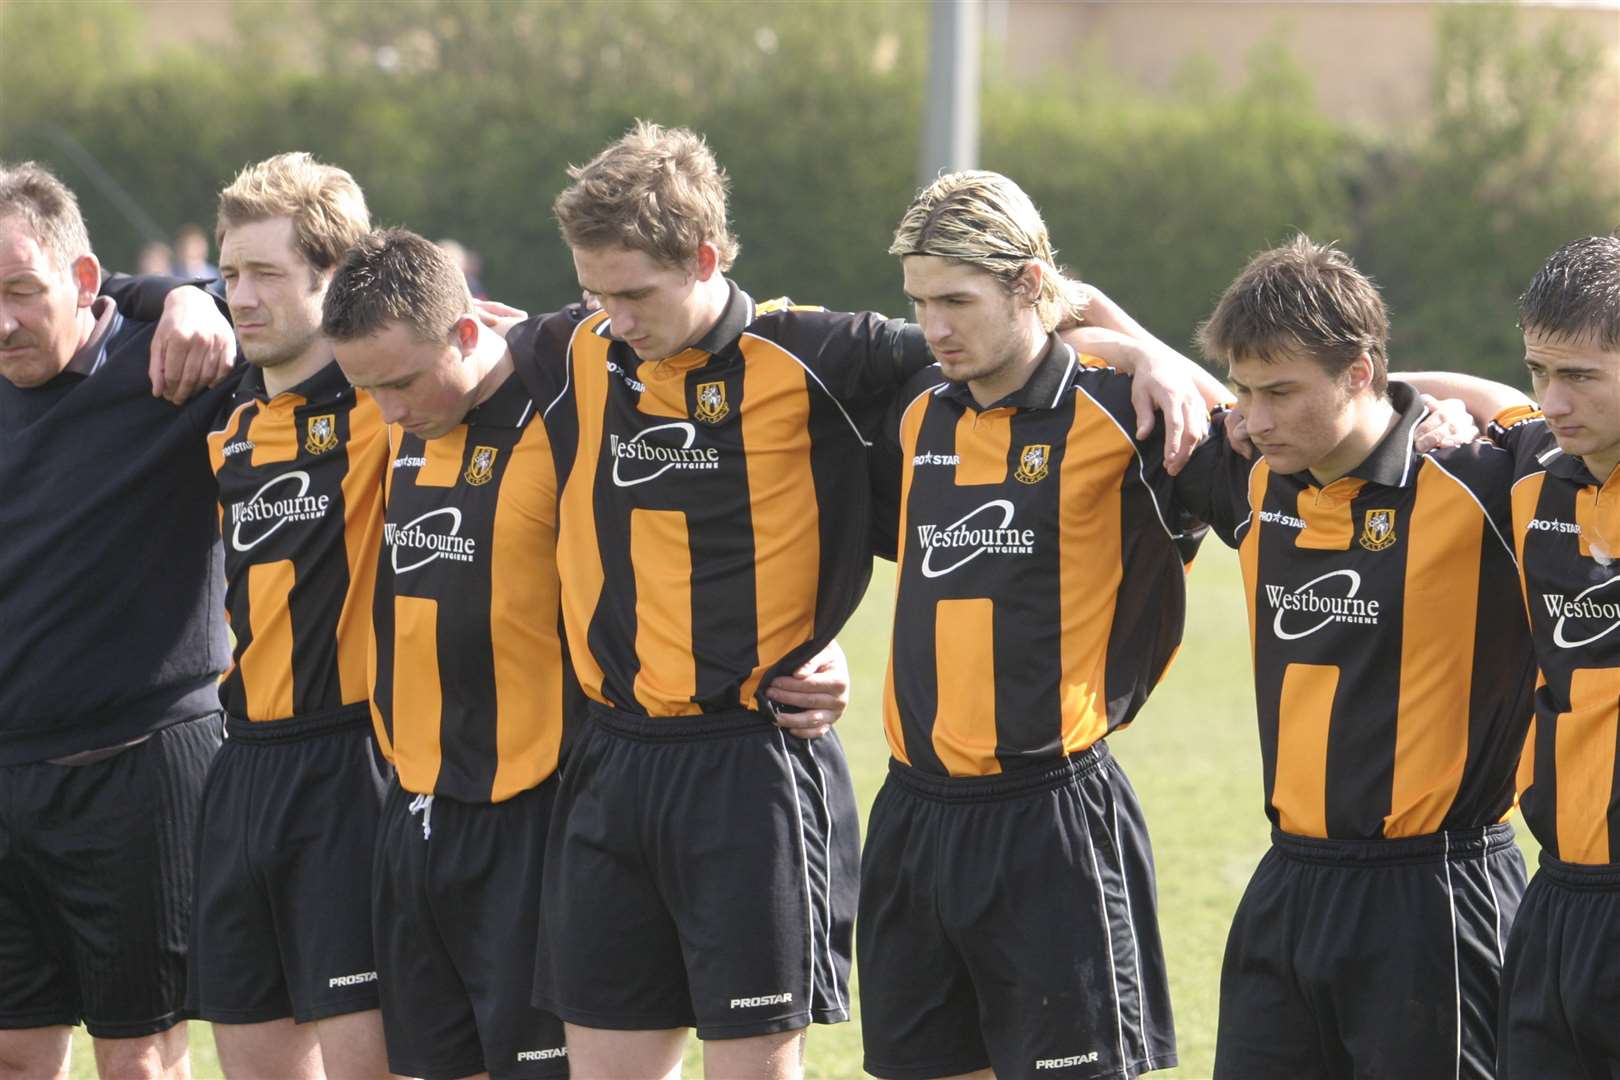 Folkestone's players fall silent for their team-mate